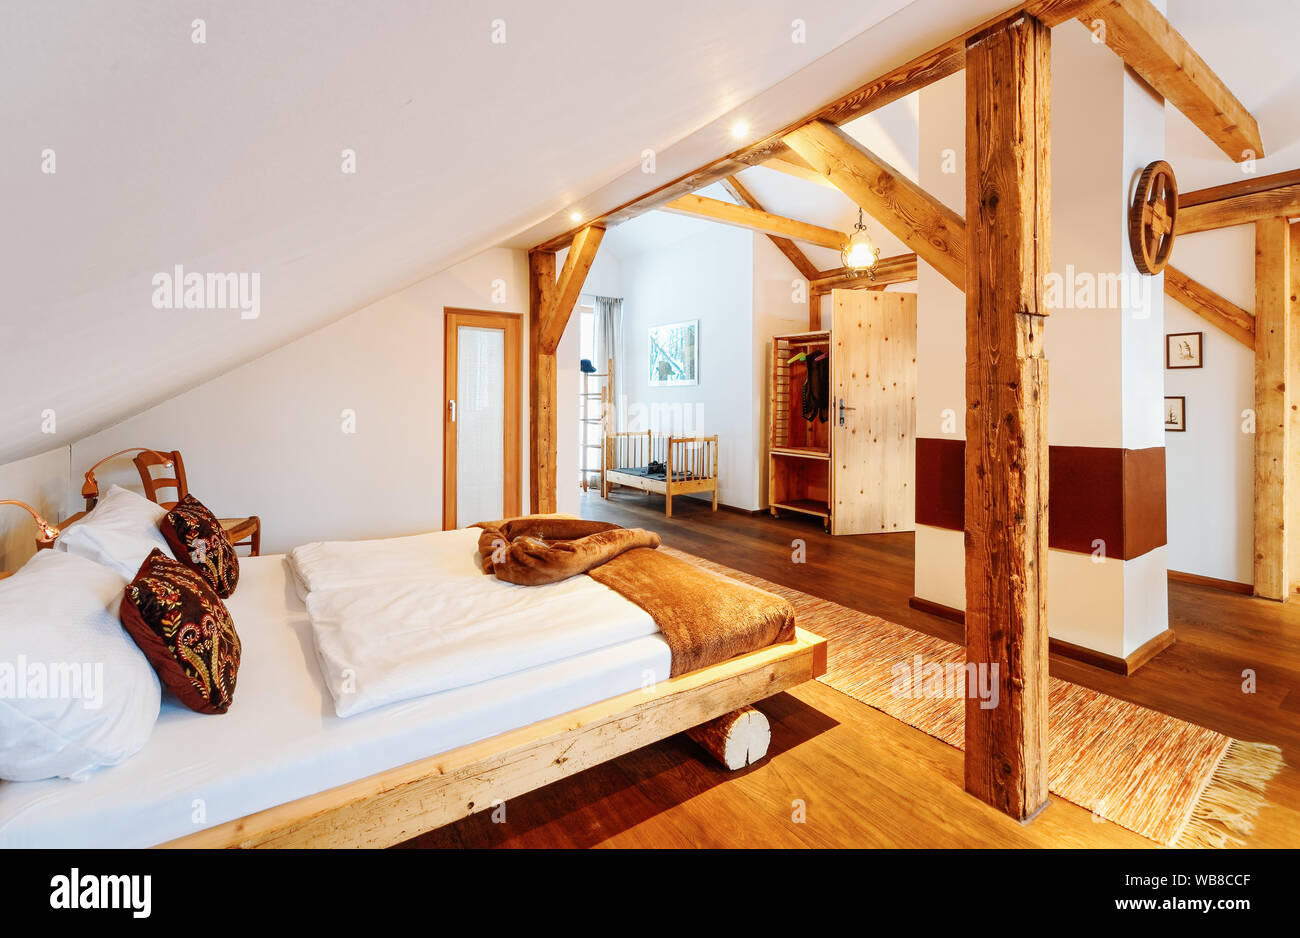 Interior Of Wood Bedroom Modern Design Of Bed Wooden Furniture Of Room Home Decor House Apartment Cozy Style Rustic Vintage And Handicraft Stock Photo Alamy